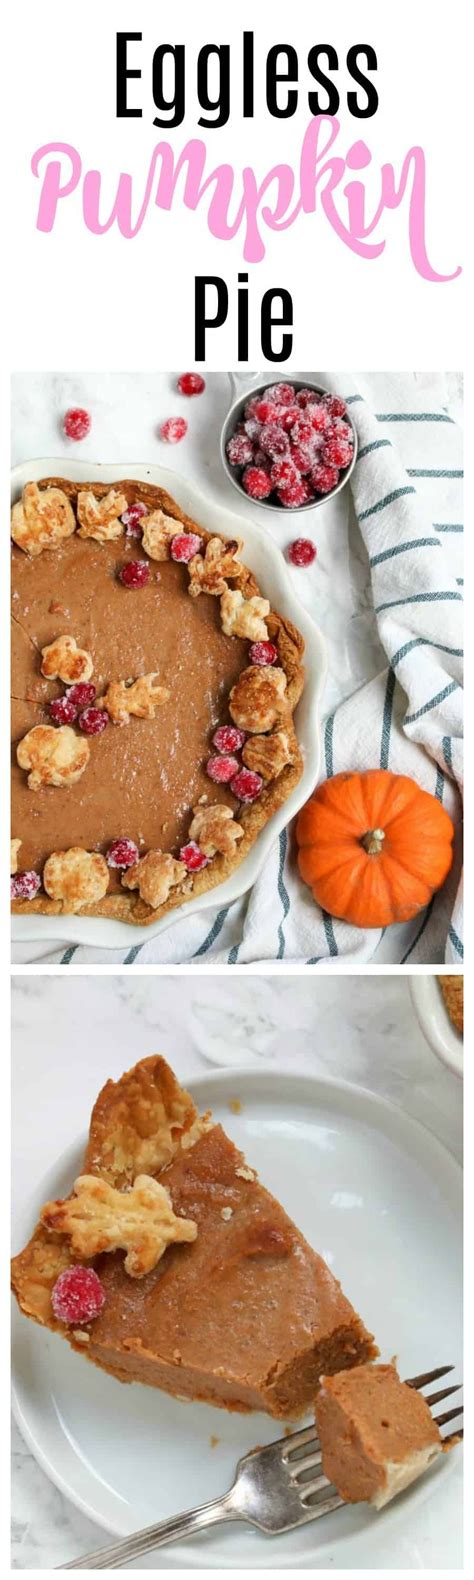 It's a pure shame it ever went out of fashion. Eggless Pumpkin Pie | Recipe | Pumpkin pie recipes ...